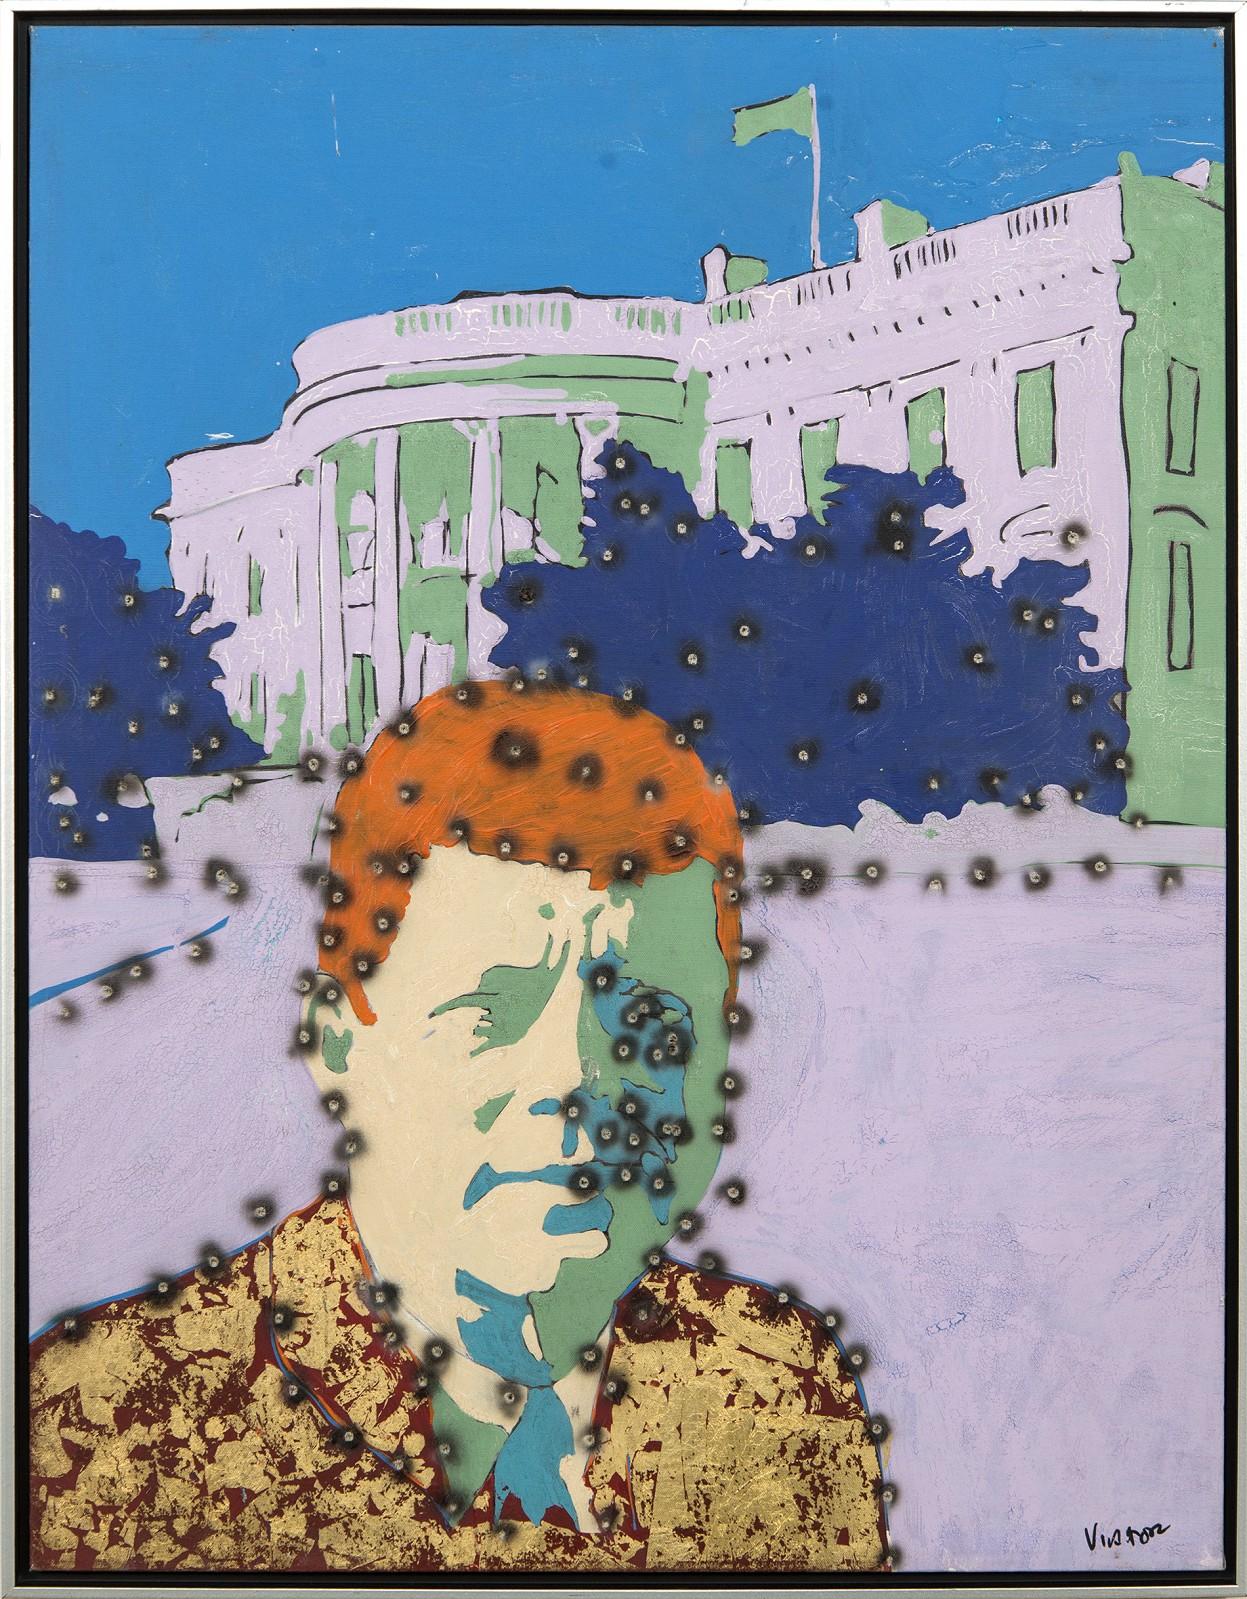 Whitehouse Kennedy - graphic pop-art, cultural America, gilded acrylic on canvas